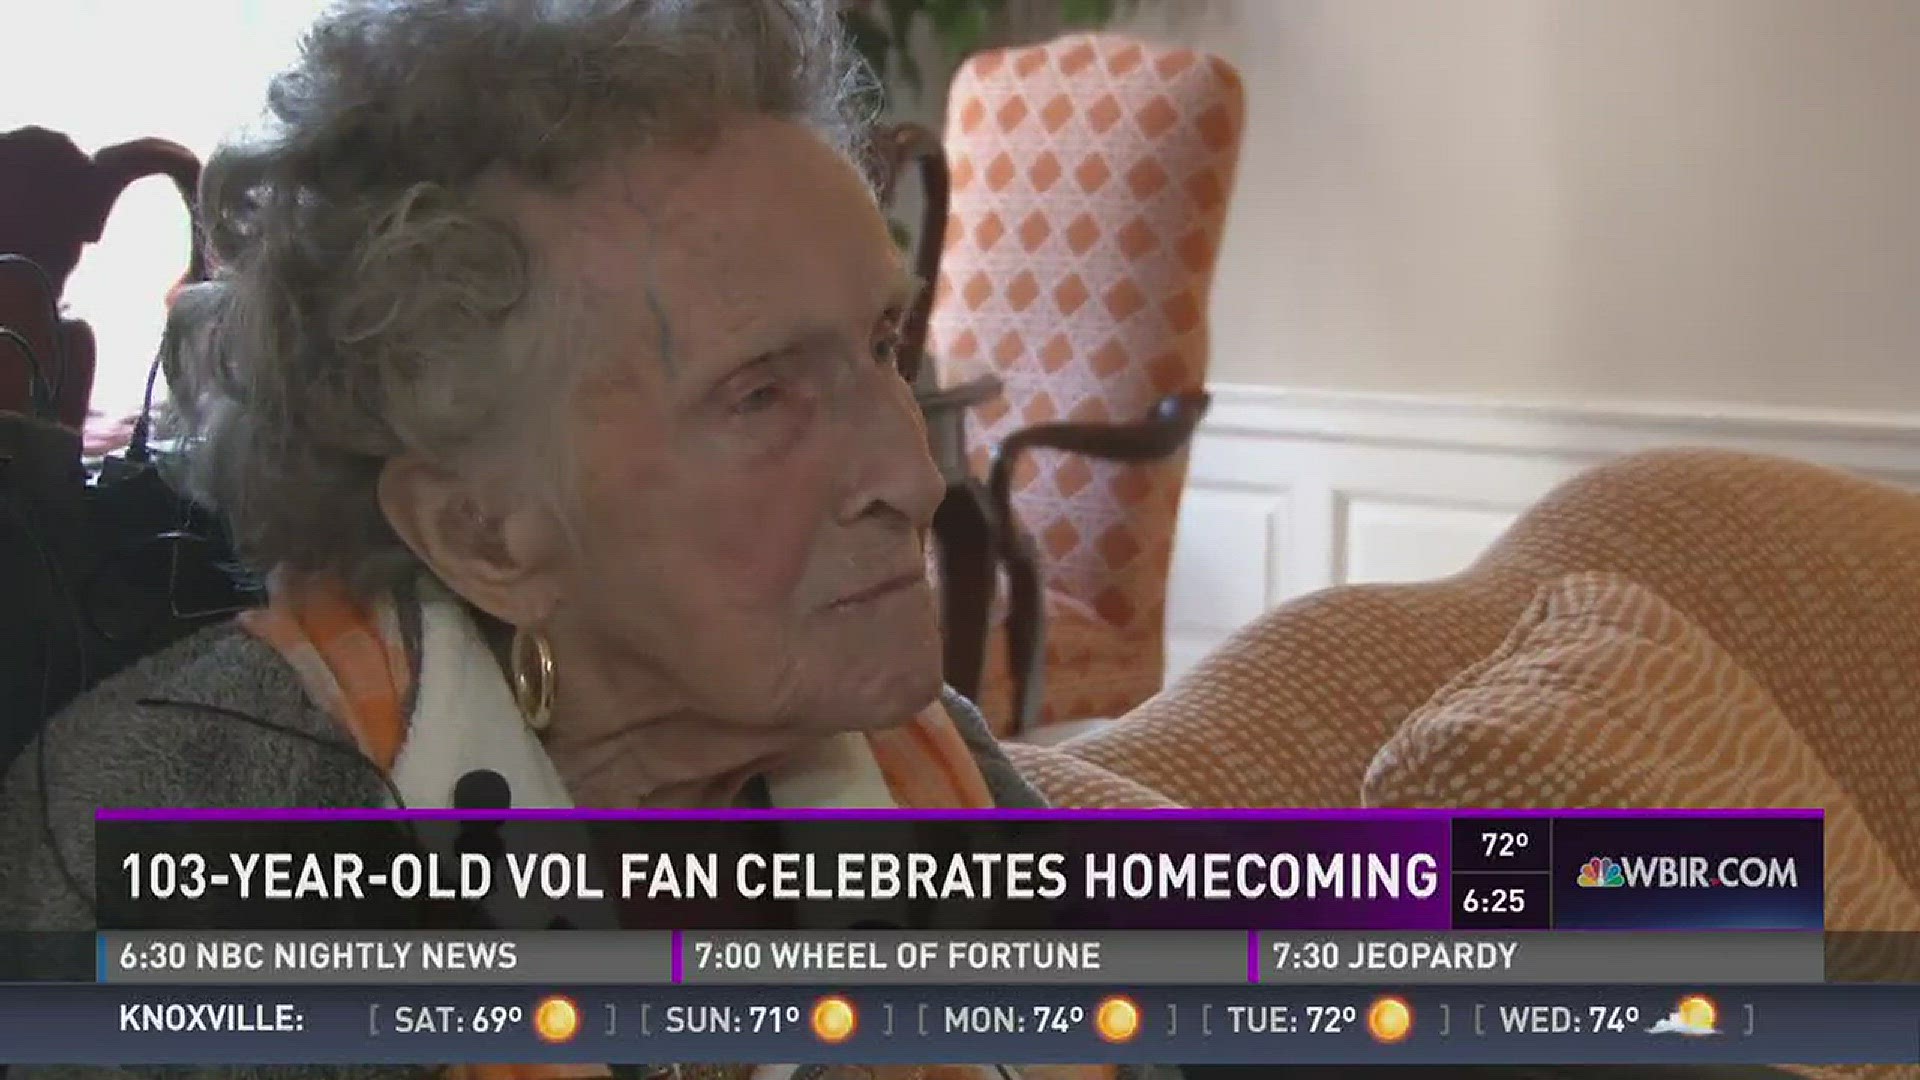 Nov. 4, 2016: Representatives from the University of Tennessee welcomed a 103-year-old alum back to campus for Homecoming.